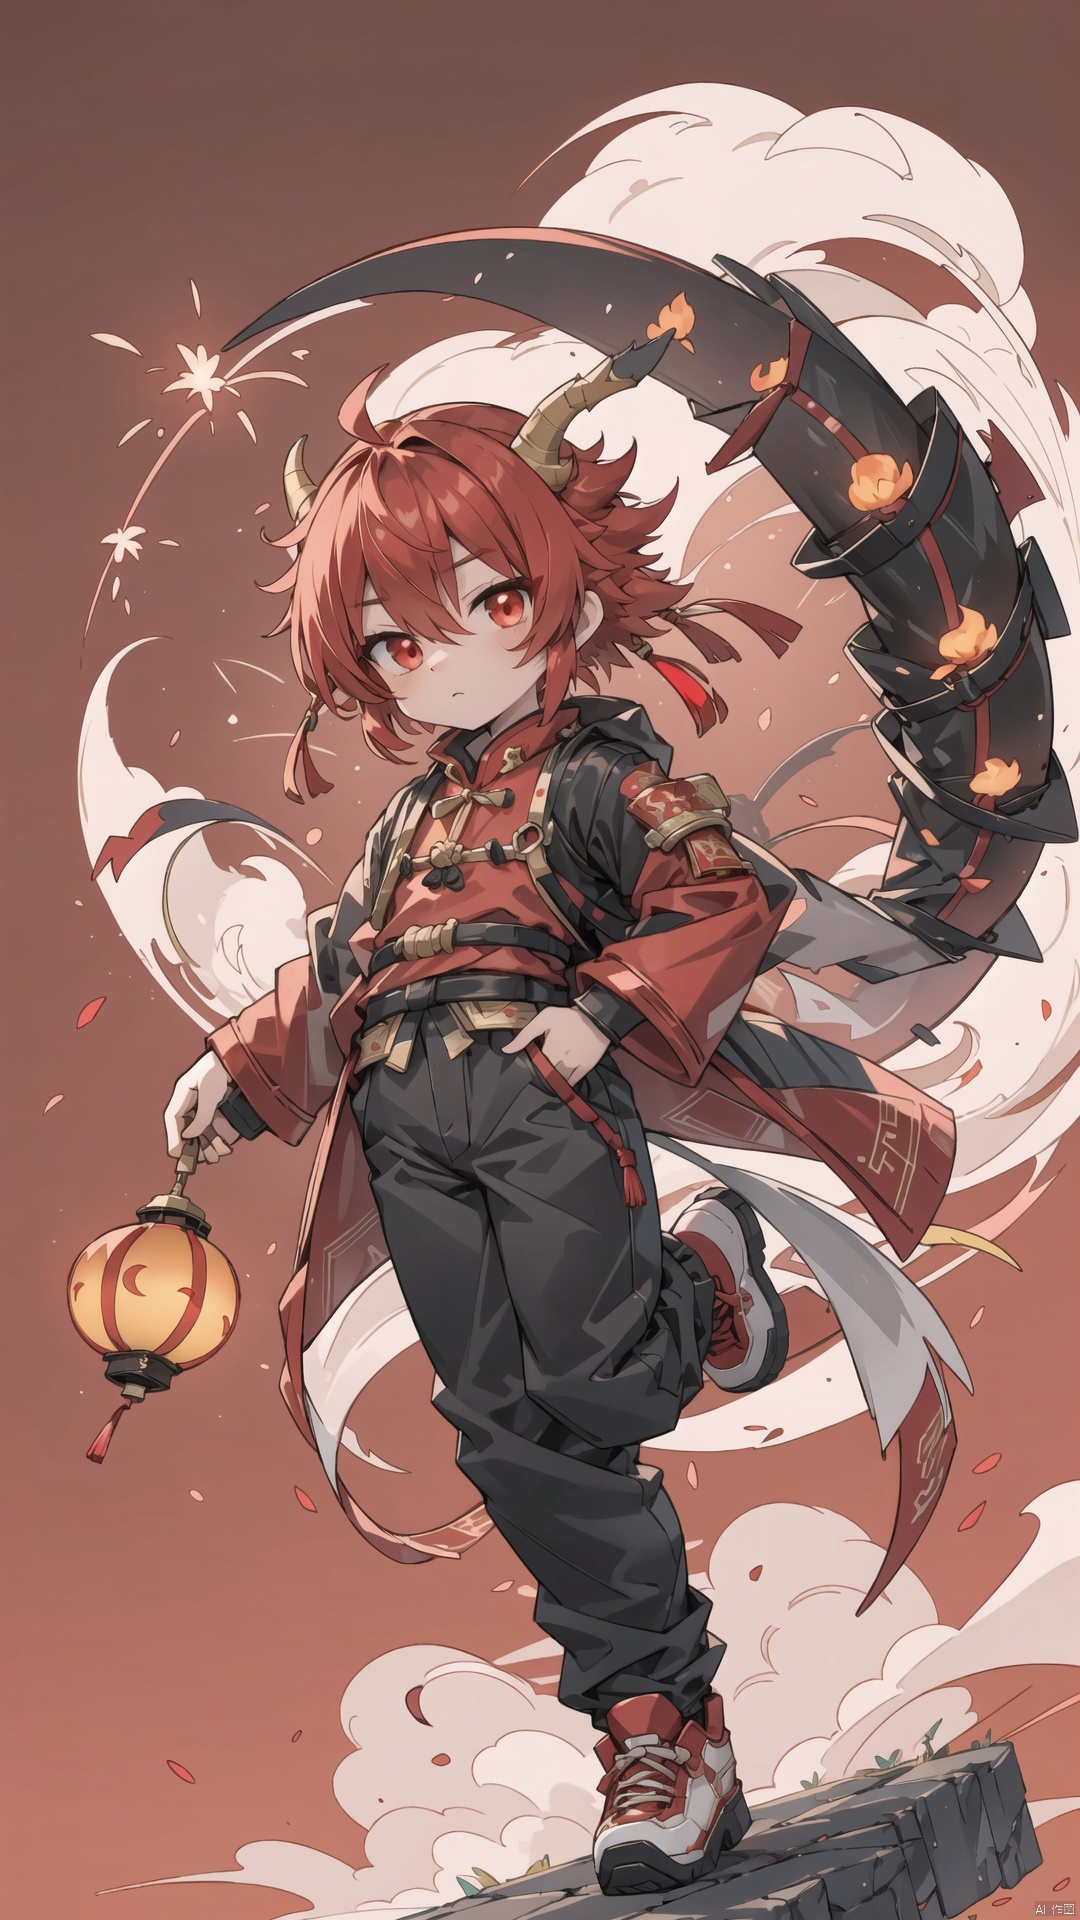  1 red dragon,red background, a small number of red lanterns, Chinese elements with firecrackers around and fireworks in the background, goddess, colors, shota, killer